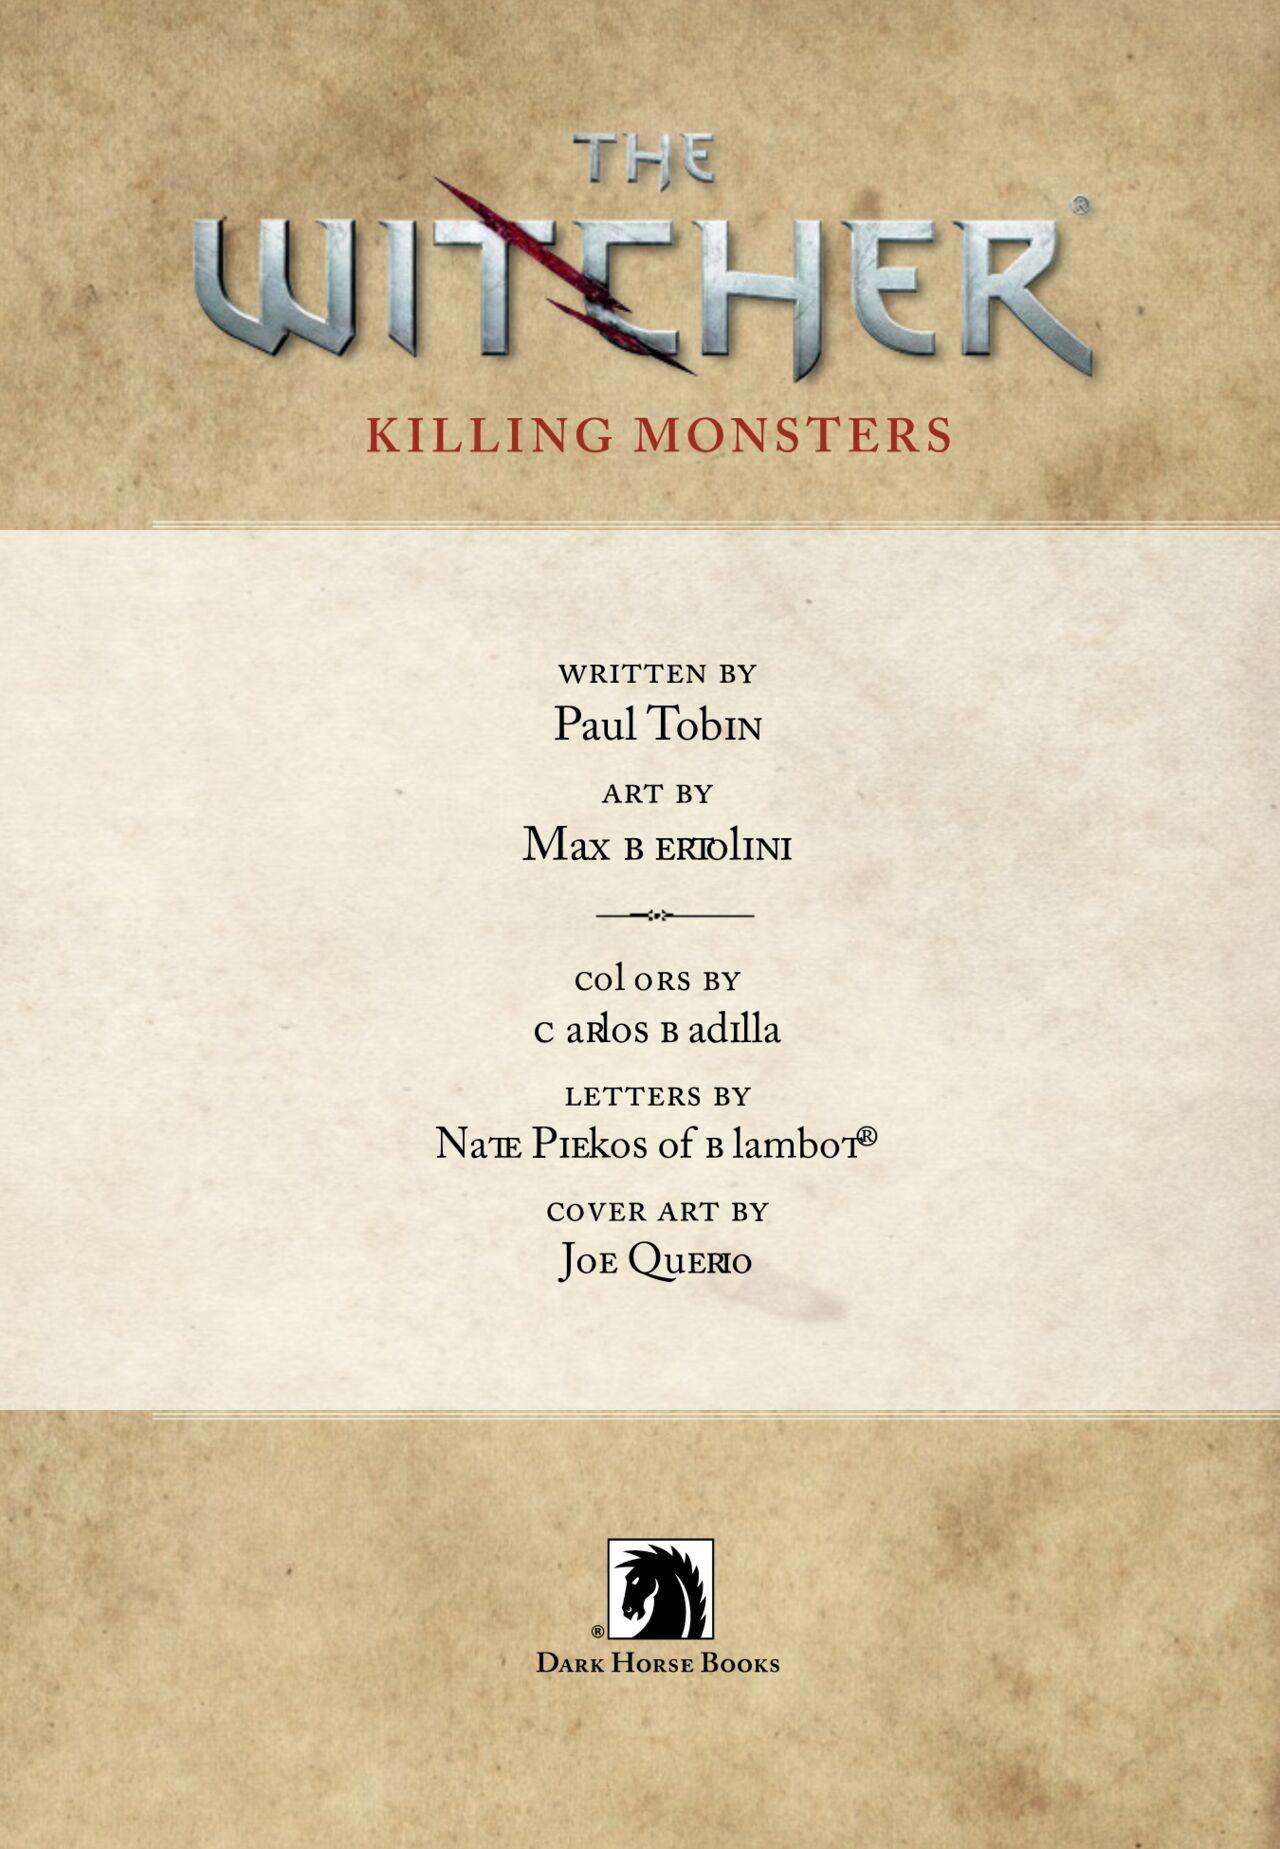 The_Witcher_Killing_Monsters 4